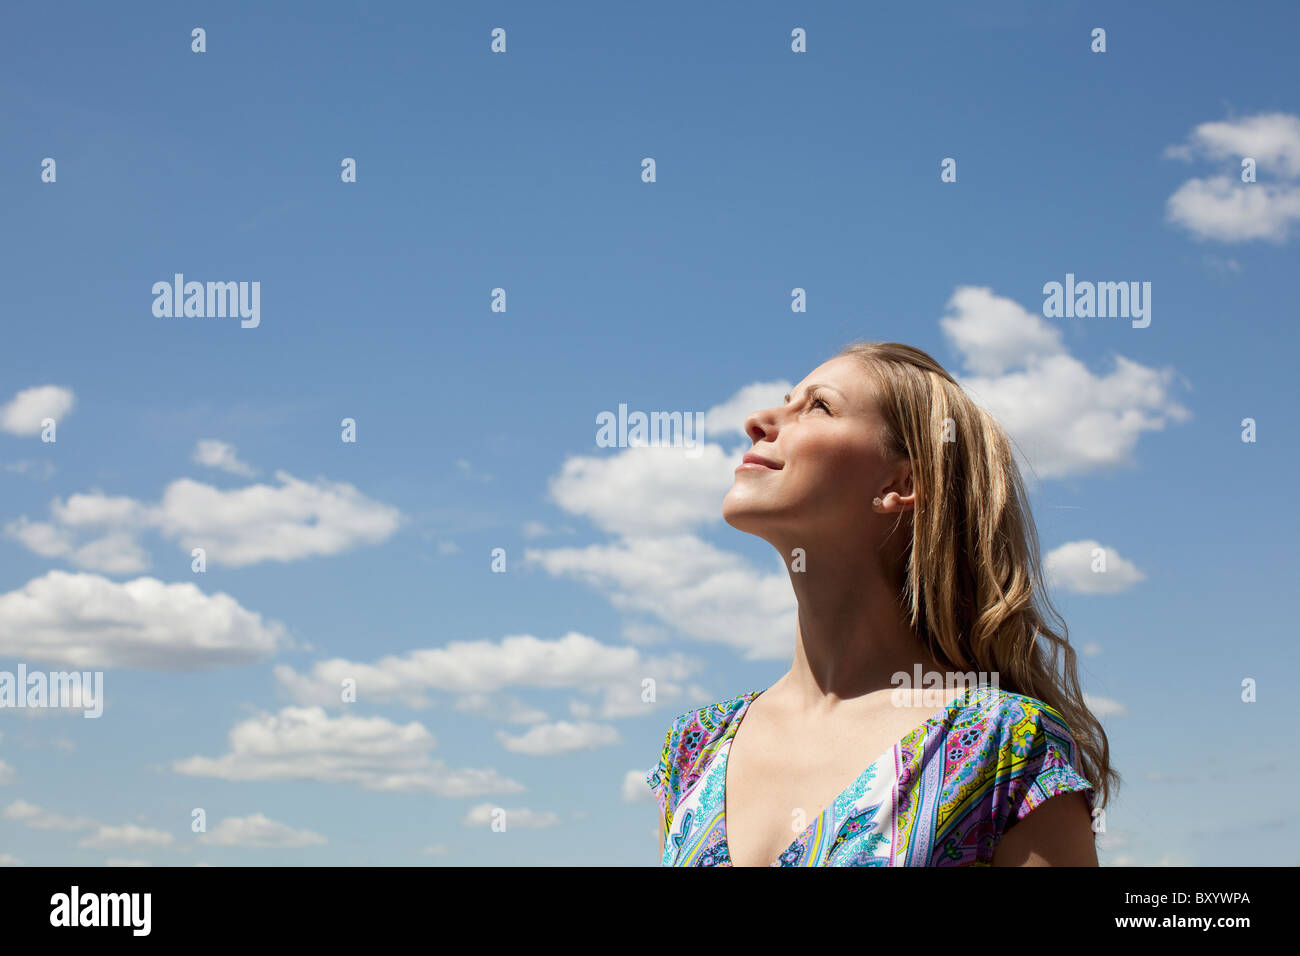 Young woman smiling against cloudy sky Stock Photo